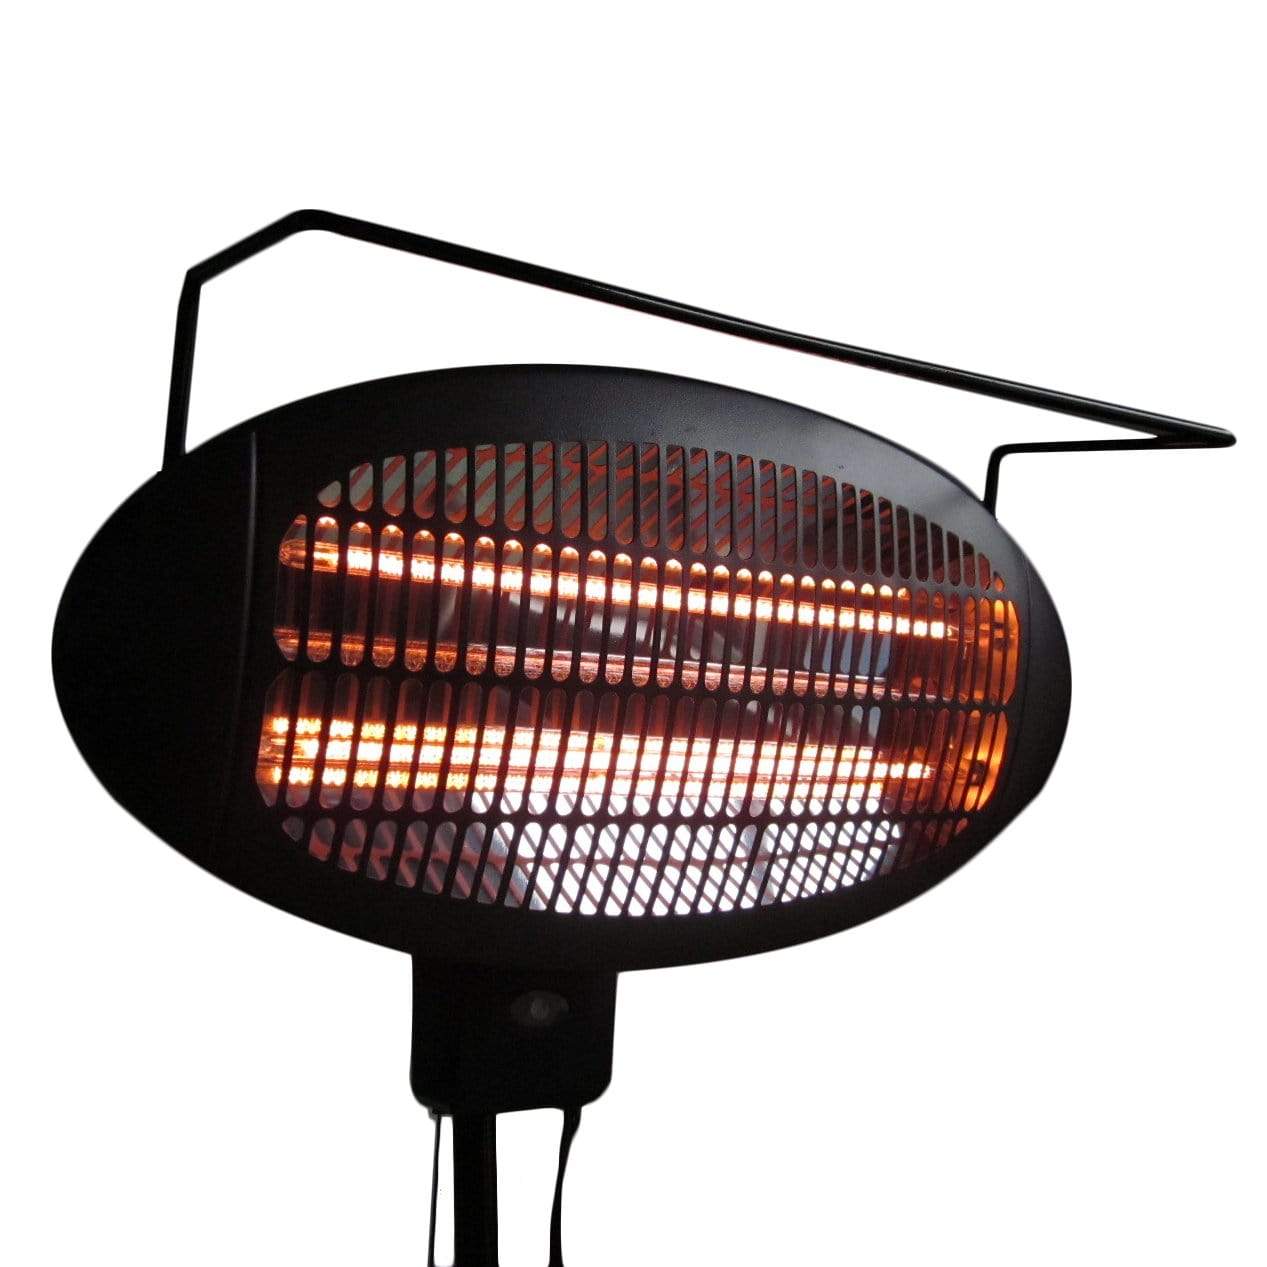 Hiland Electric Free Standing Patio Heater Hiland Patio Heaters Promotional Electric Heater